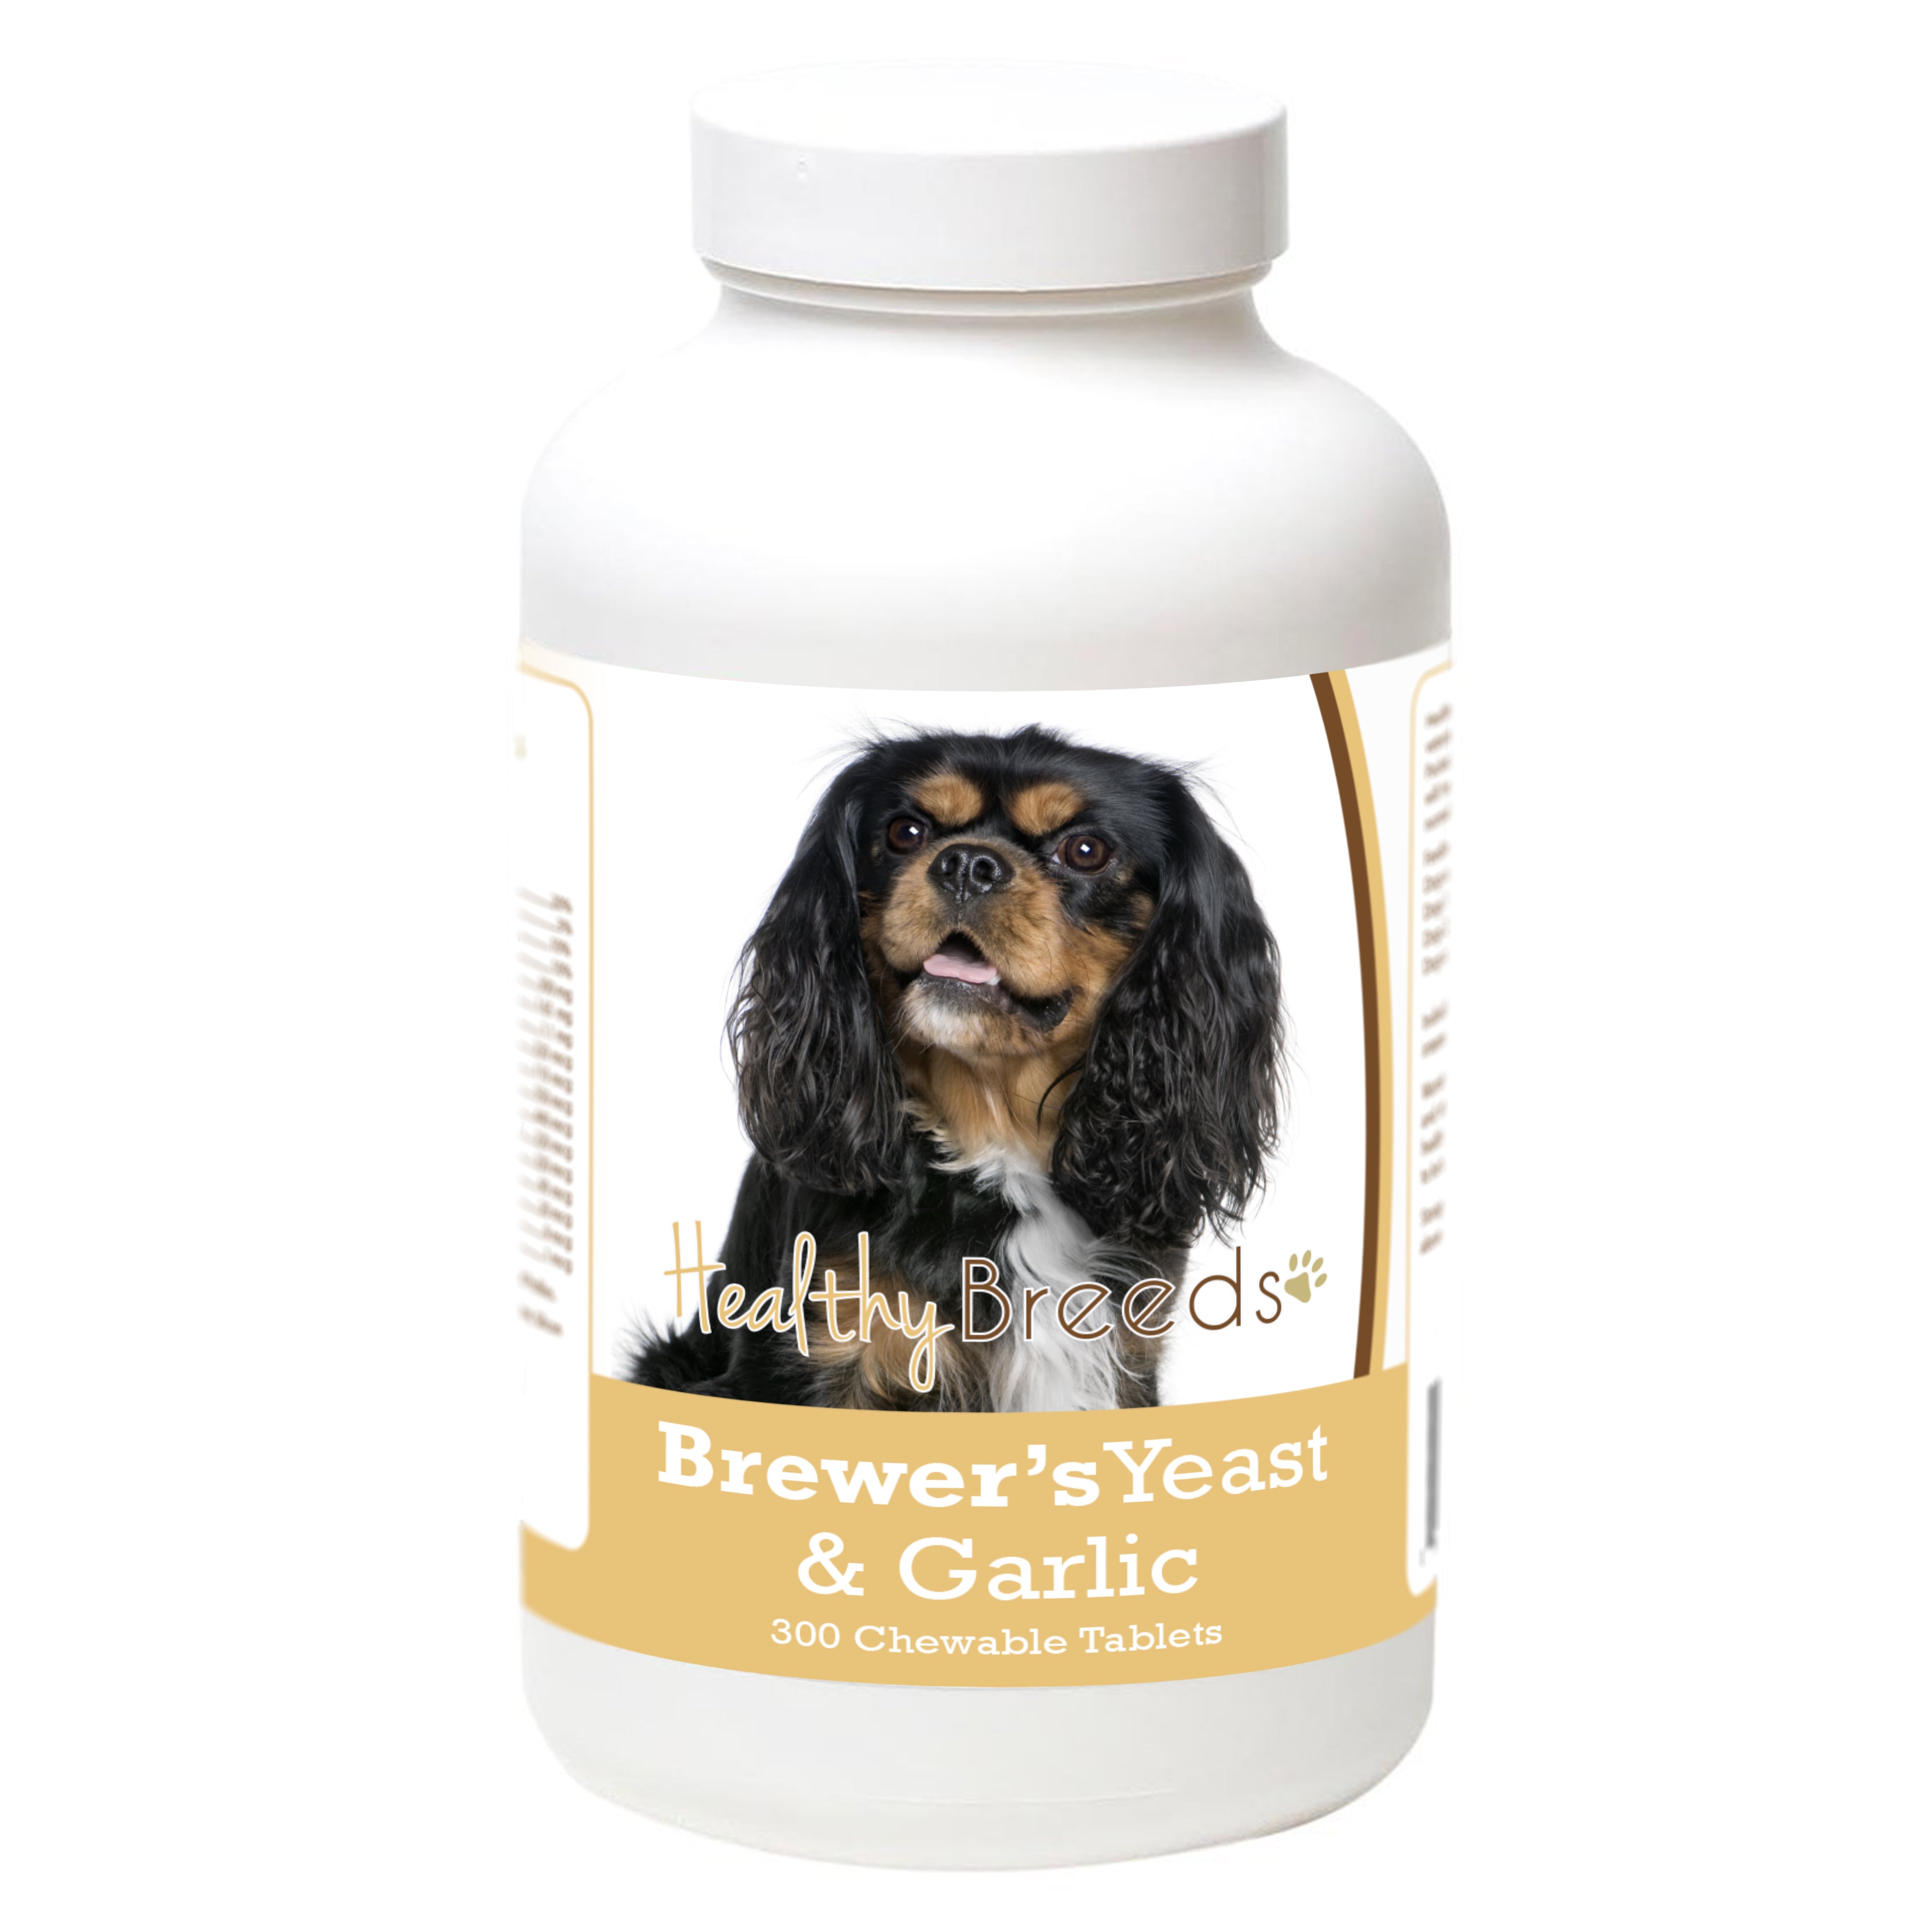 Cavalier King Charles Spaniel Brewers Yeast Tablets 300 Count